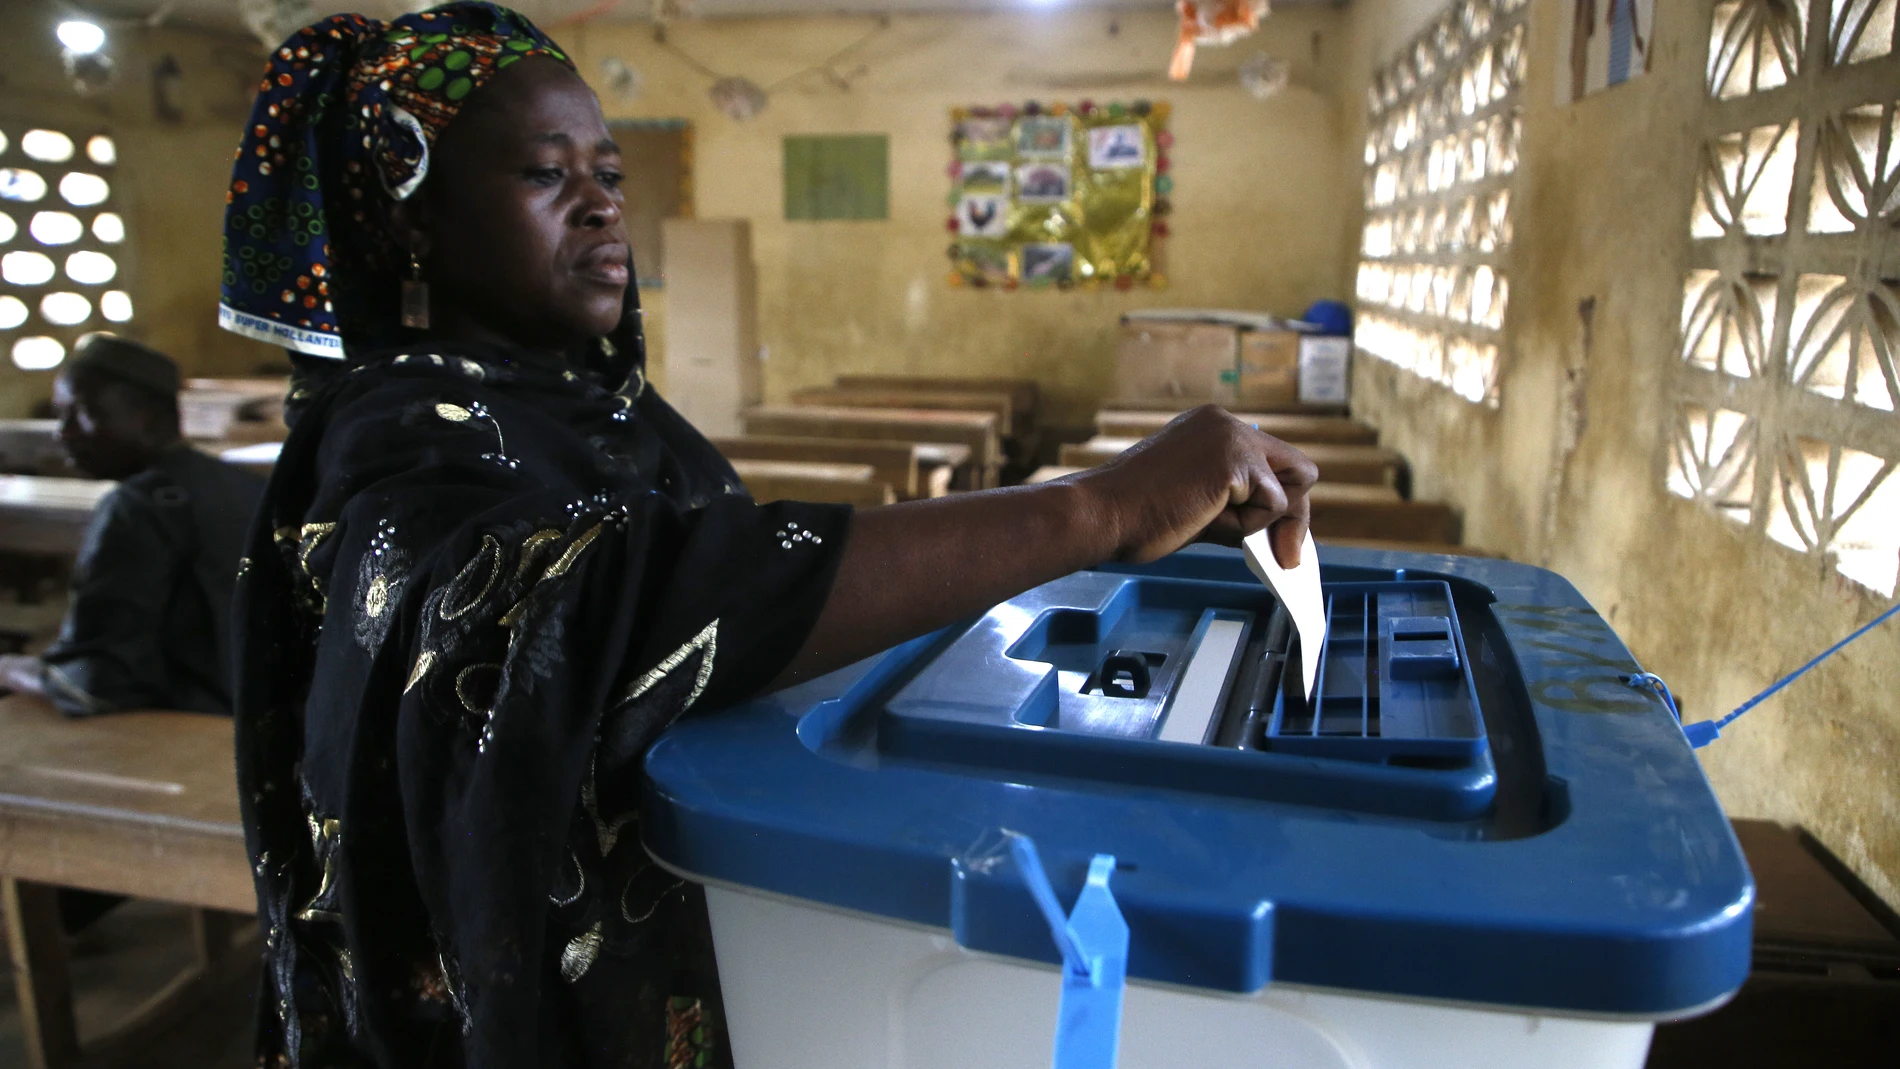 Abidjan (Cote D''ivoire), 18/06/2023.- A Malian national casts her vote at a polling station during the referendum on the draft of the new constitution of Mali, in the district of Adjame, Ivory Coast, 18 June 2023. Mali is holding a referendum on reforming the country's constitution, including a proposal to drop French as the country's official language. An estimated 3 million Malians live in Ivory Coast. (Costa de Marfil) EFE/EPA/LEGNAN KOULA 